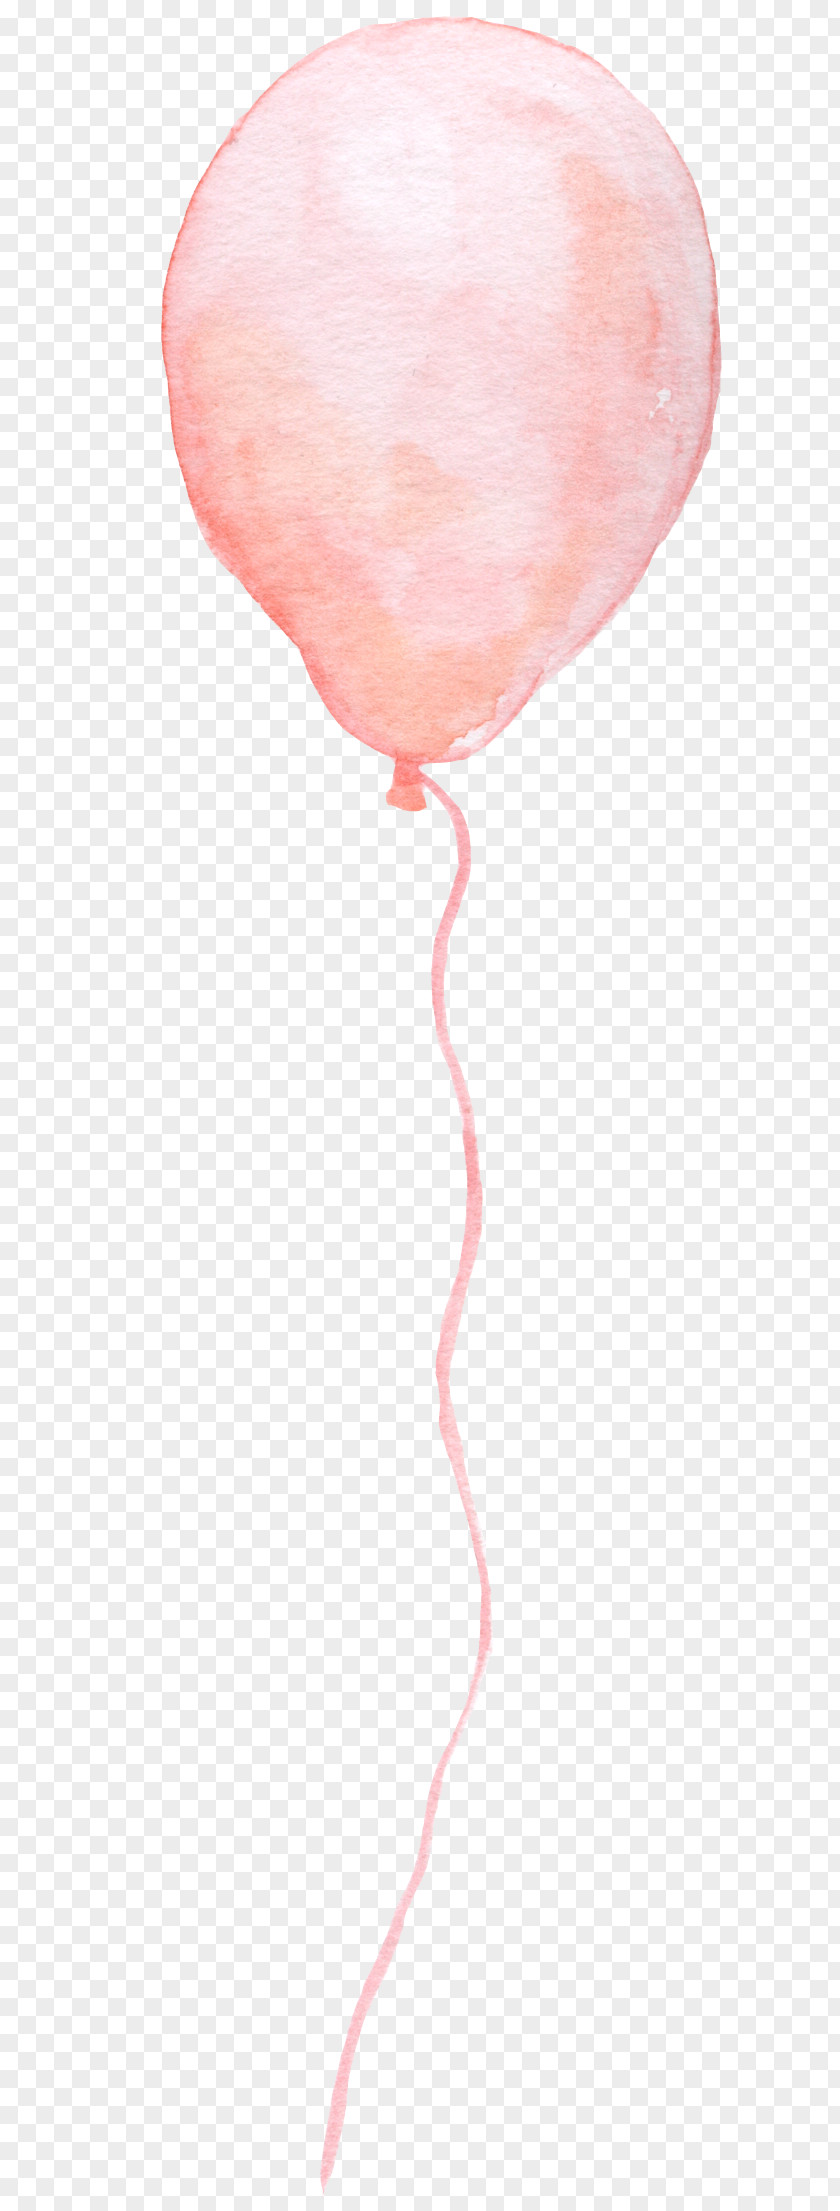 Pink Balloons Google Images Clip Art PNG